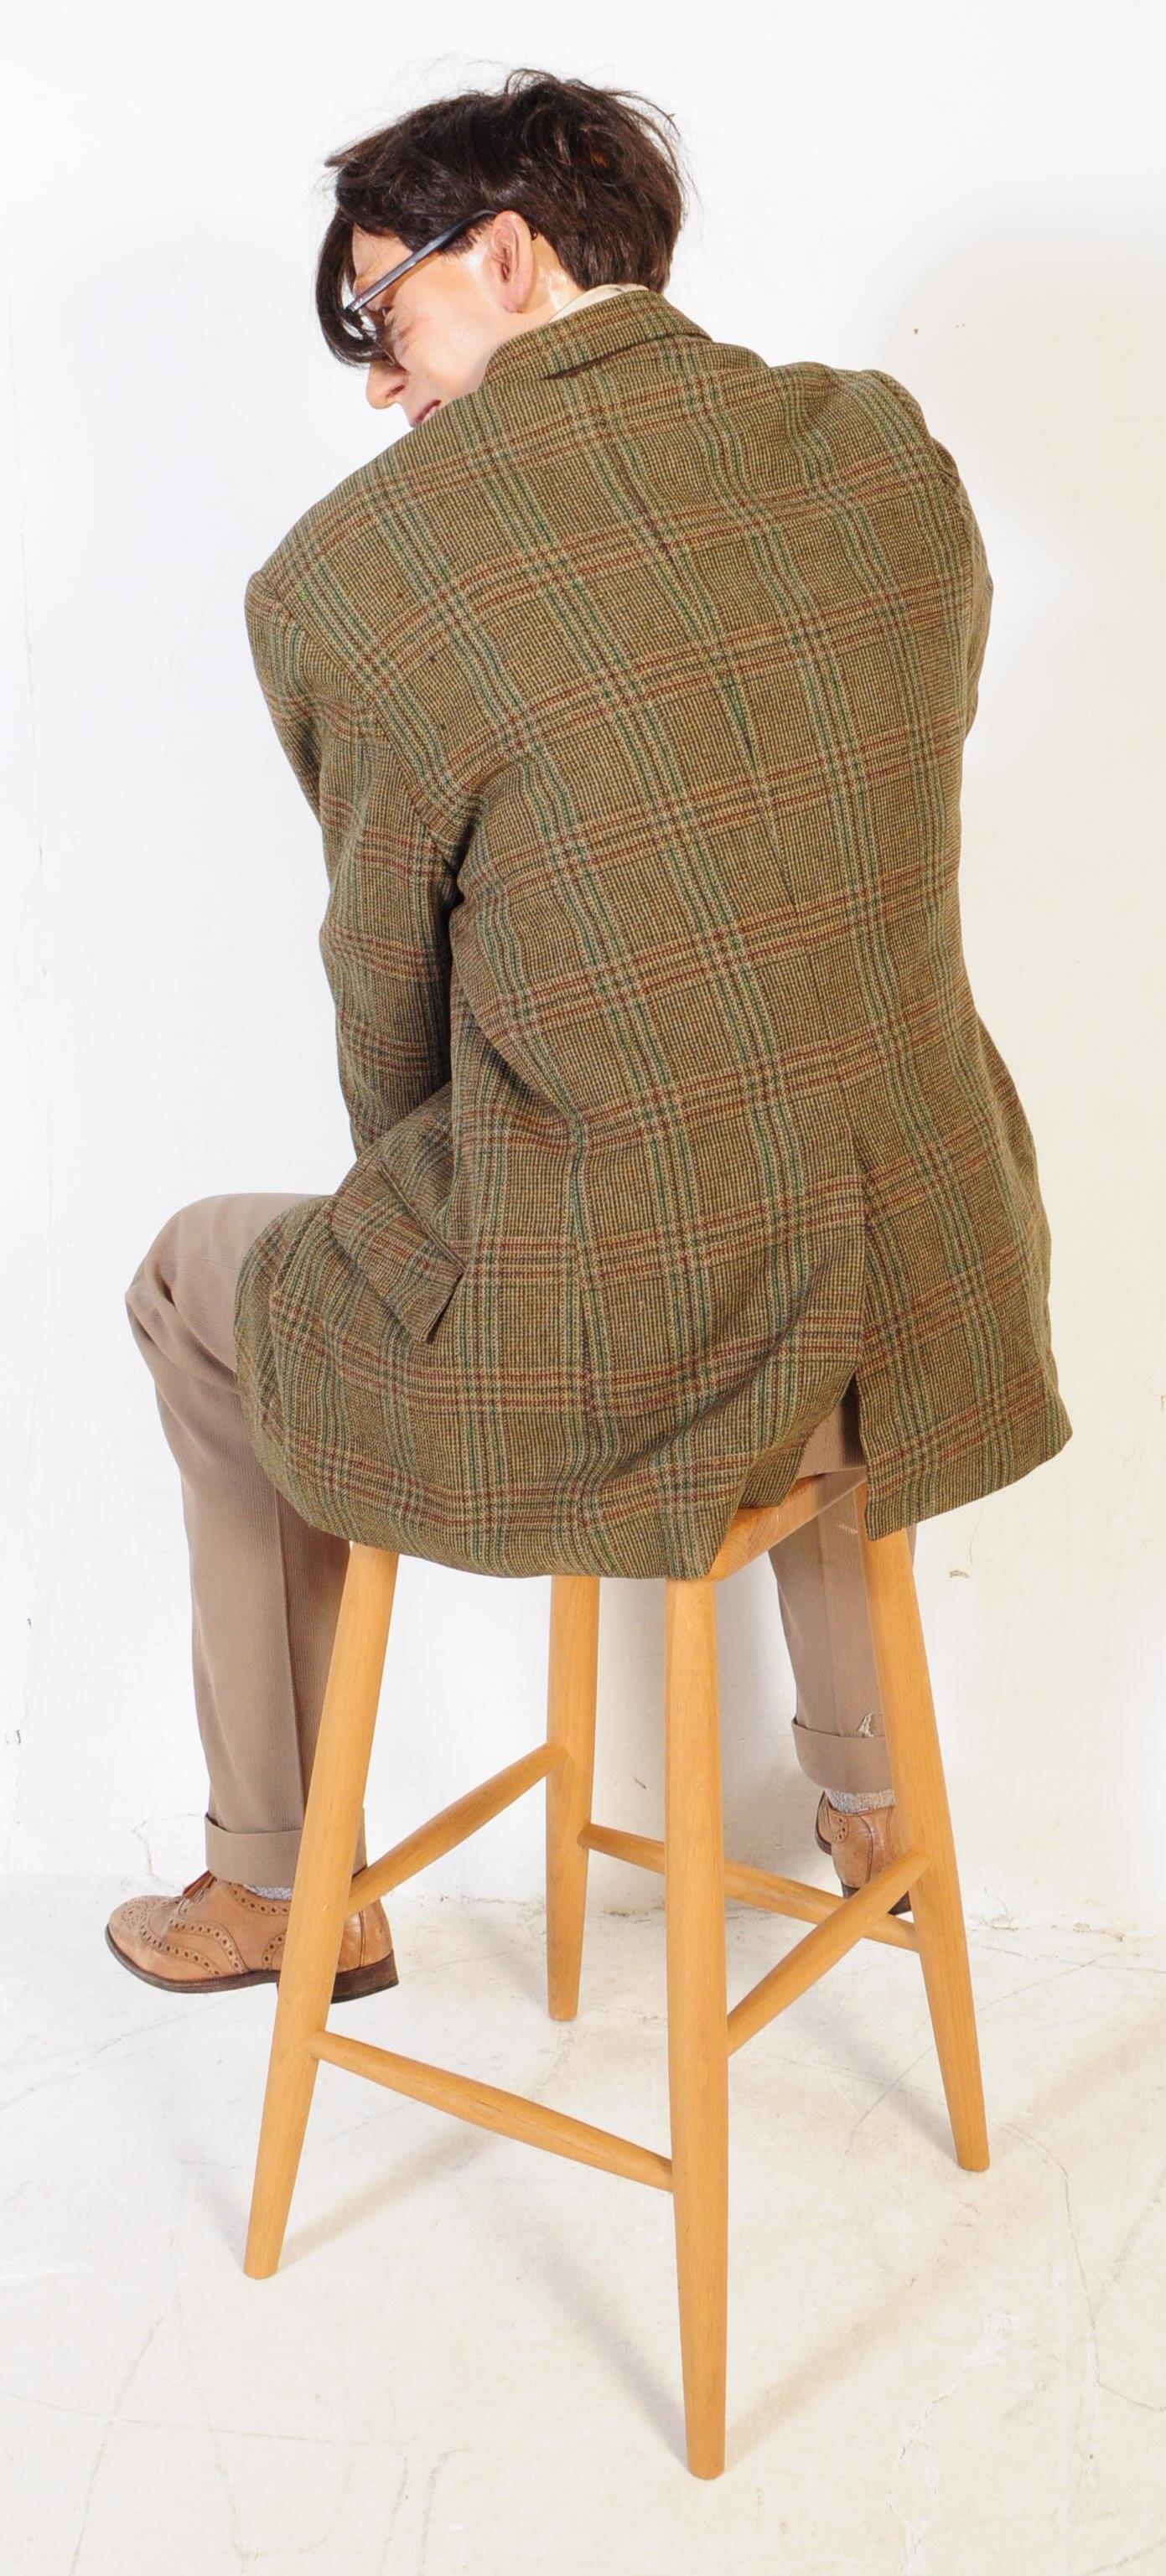 LATE 20TH CENTURY LIFE SIZE SEATED COUNTRY GENT MANNEQUIN - Image 7 of 7